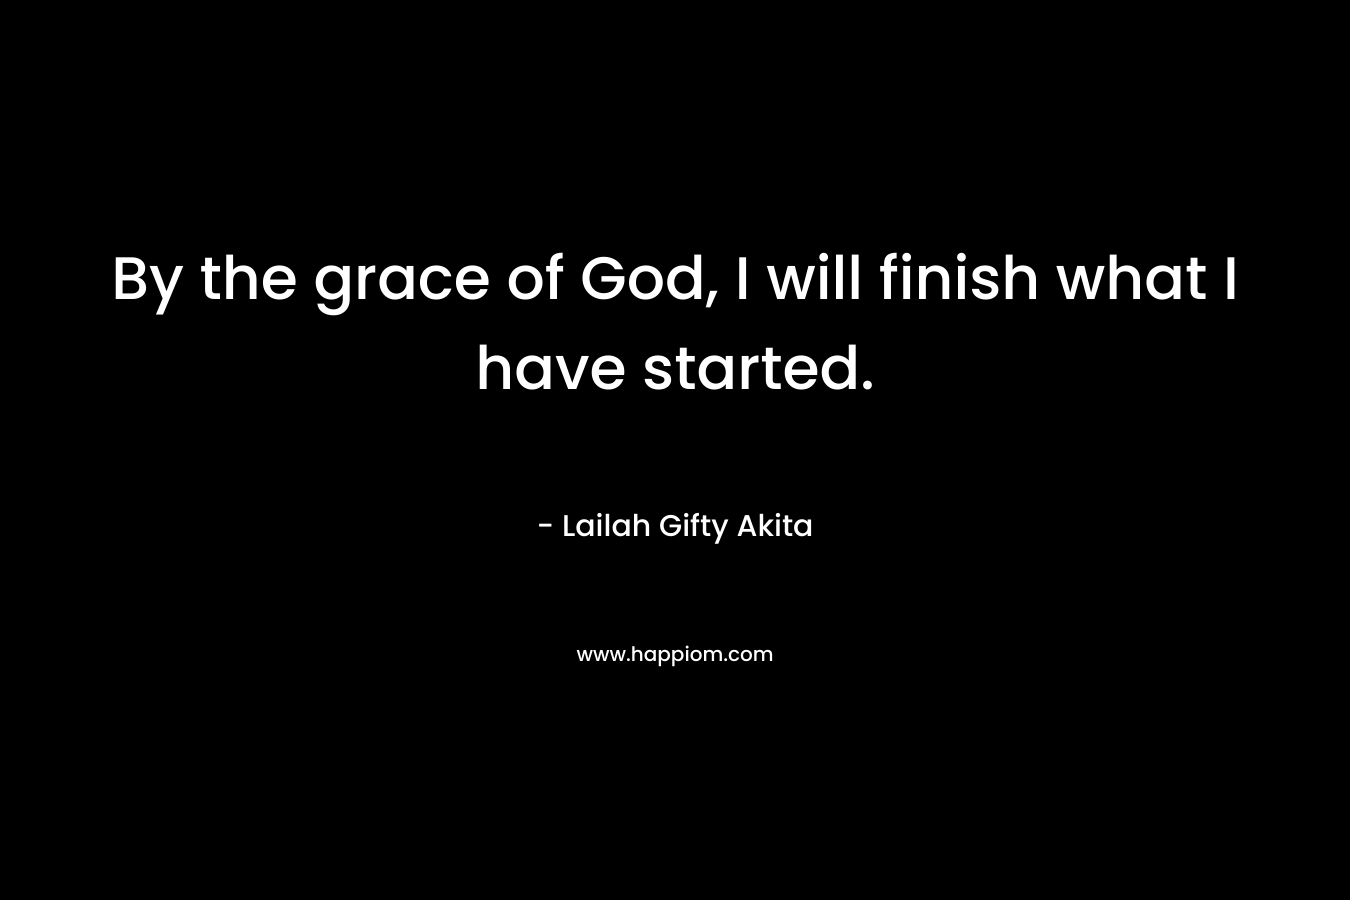 By the grace of God, I will finish what I have started.